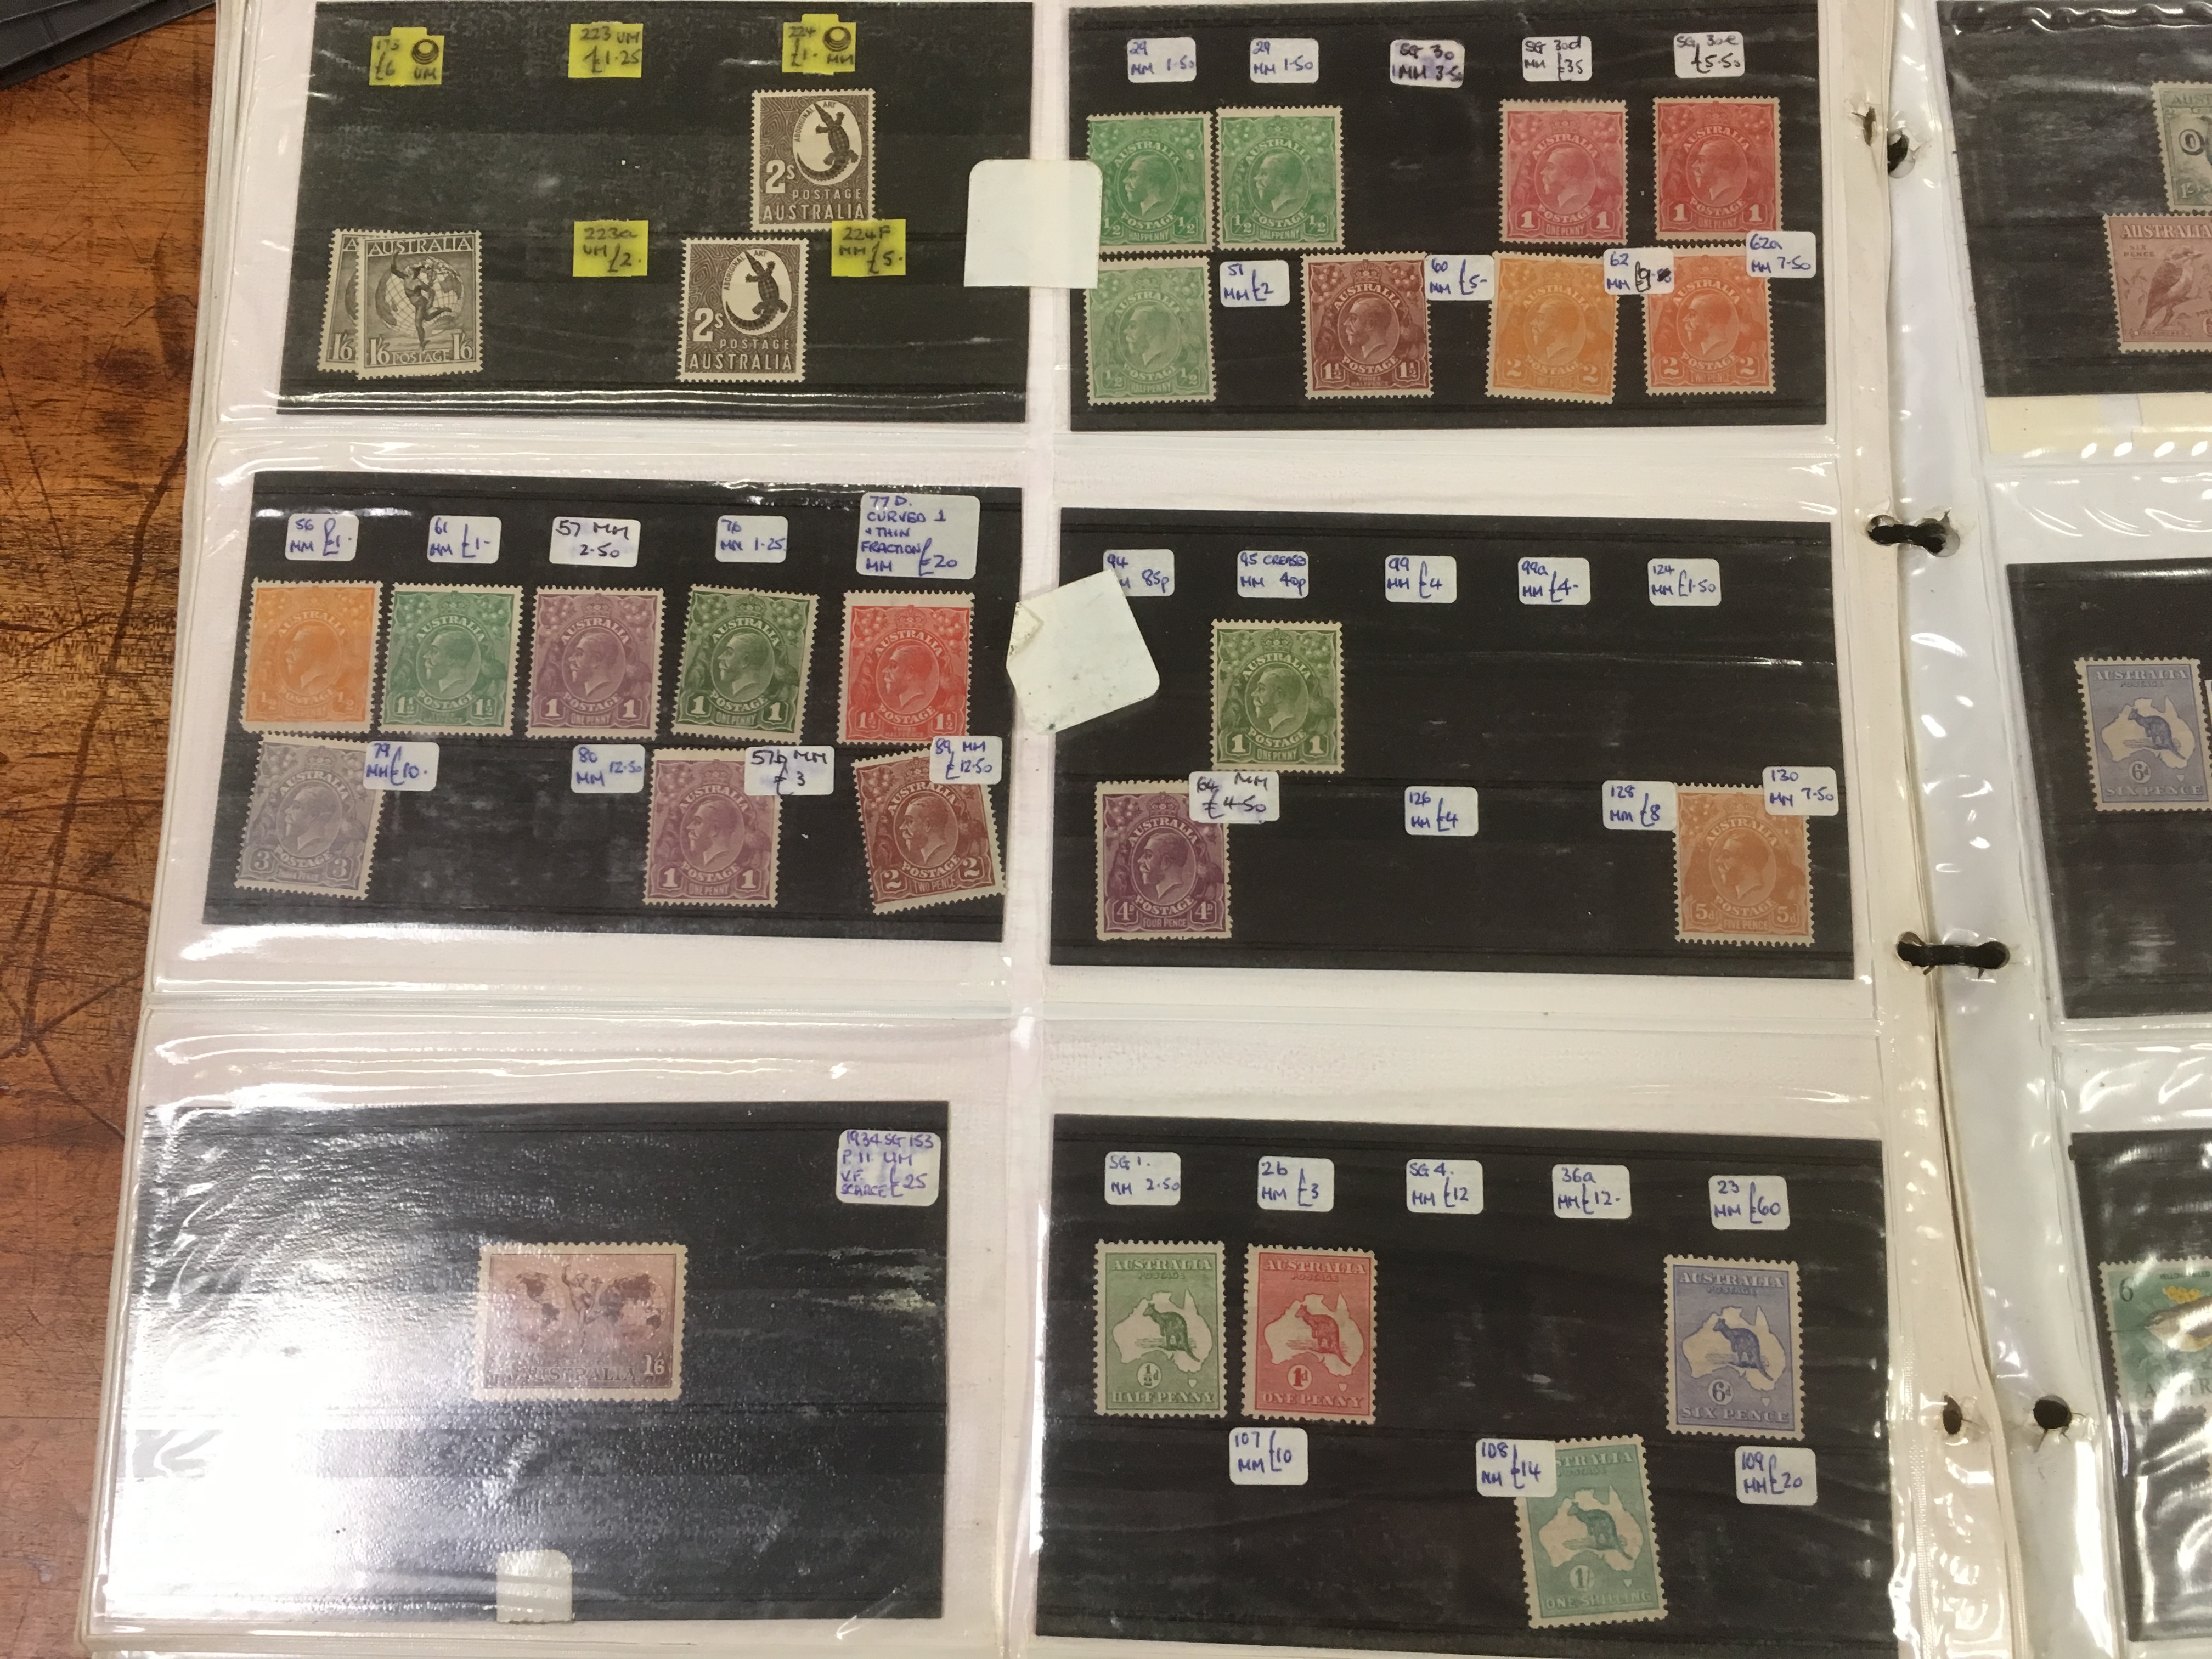 AUSTRALIA: EX DEALER'S STOCK OF SETS AND SINGLES ON PAGES, - Image 5 of 10